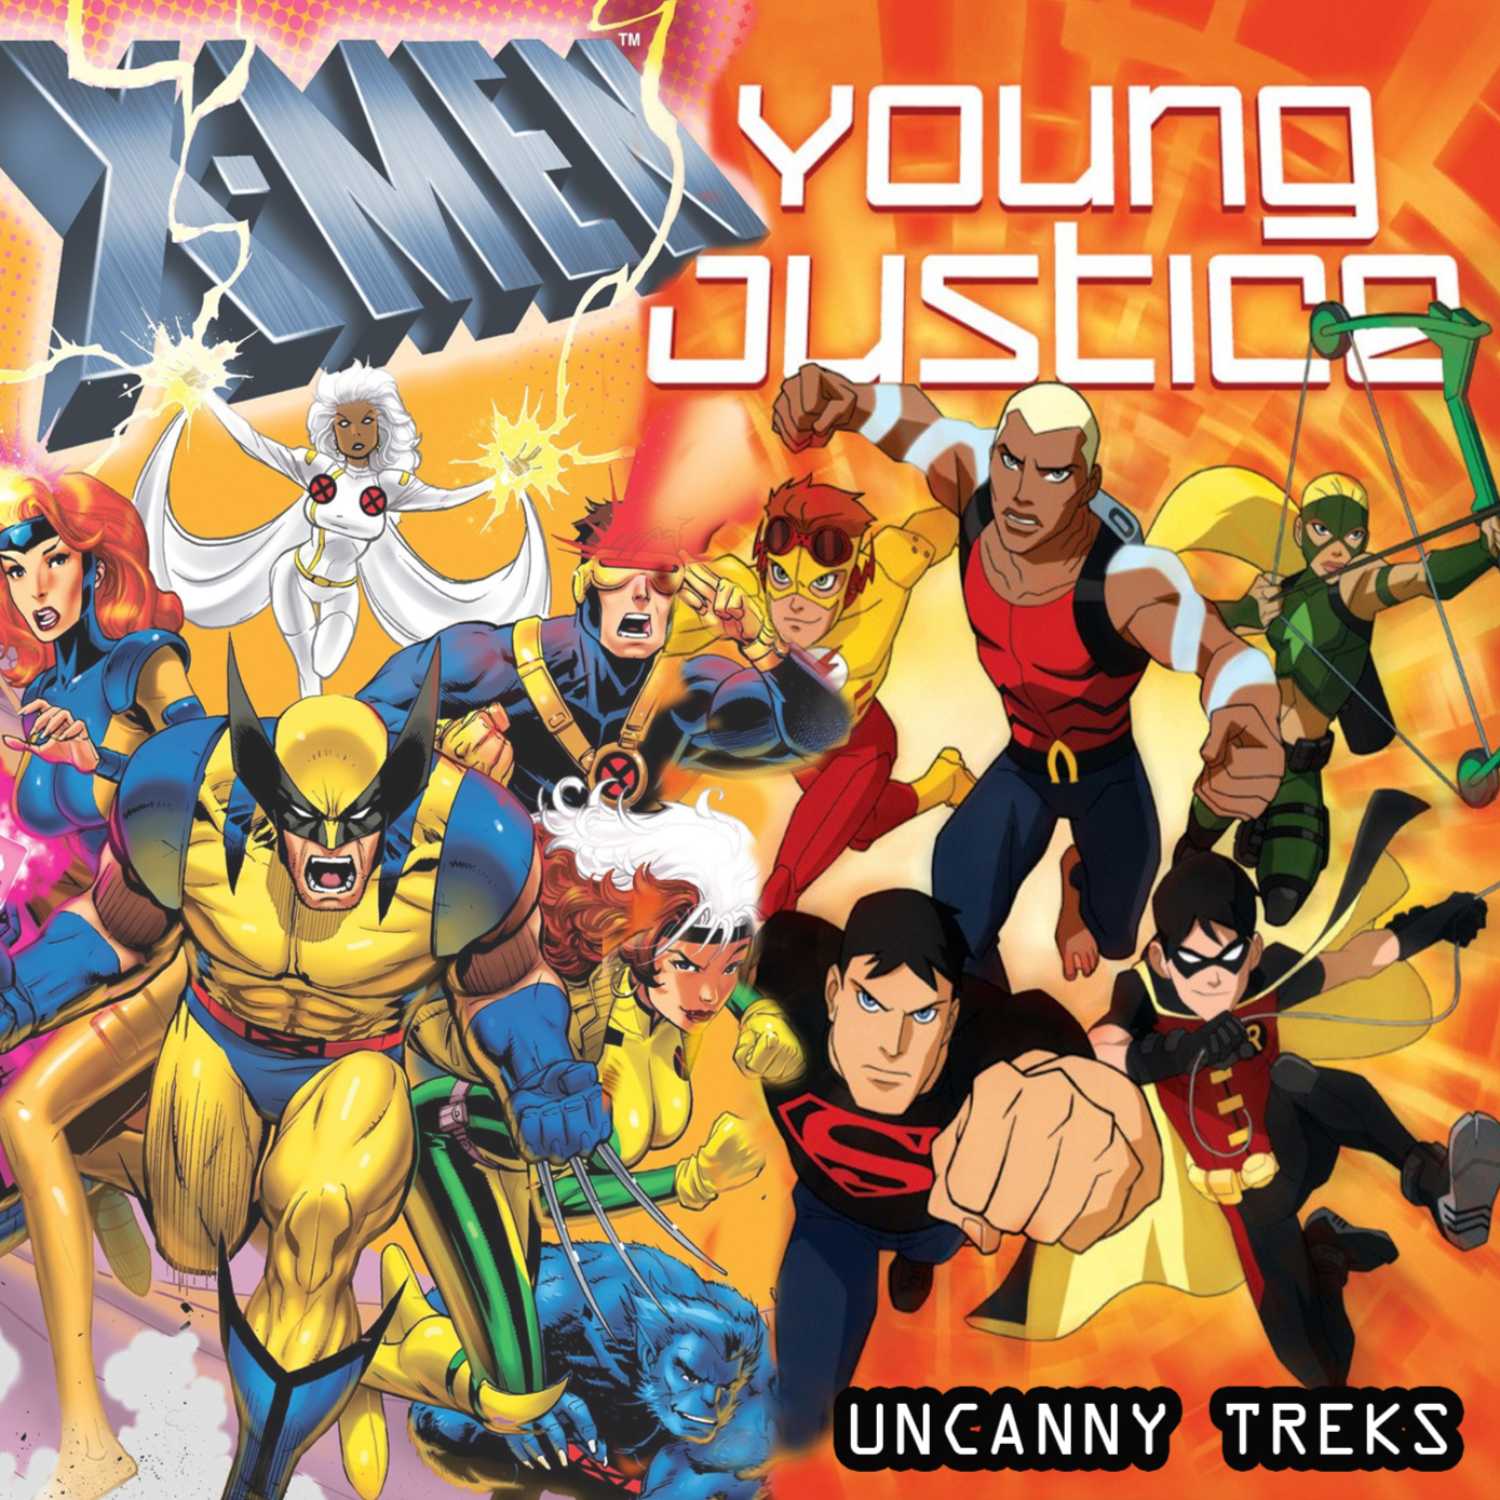 X-Men 92 vs. Young Justice: An Introduction (Unlocked Patreon Content)